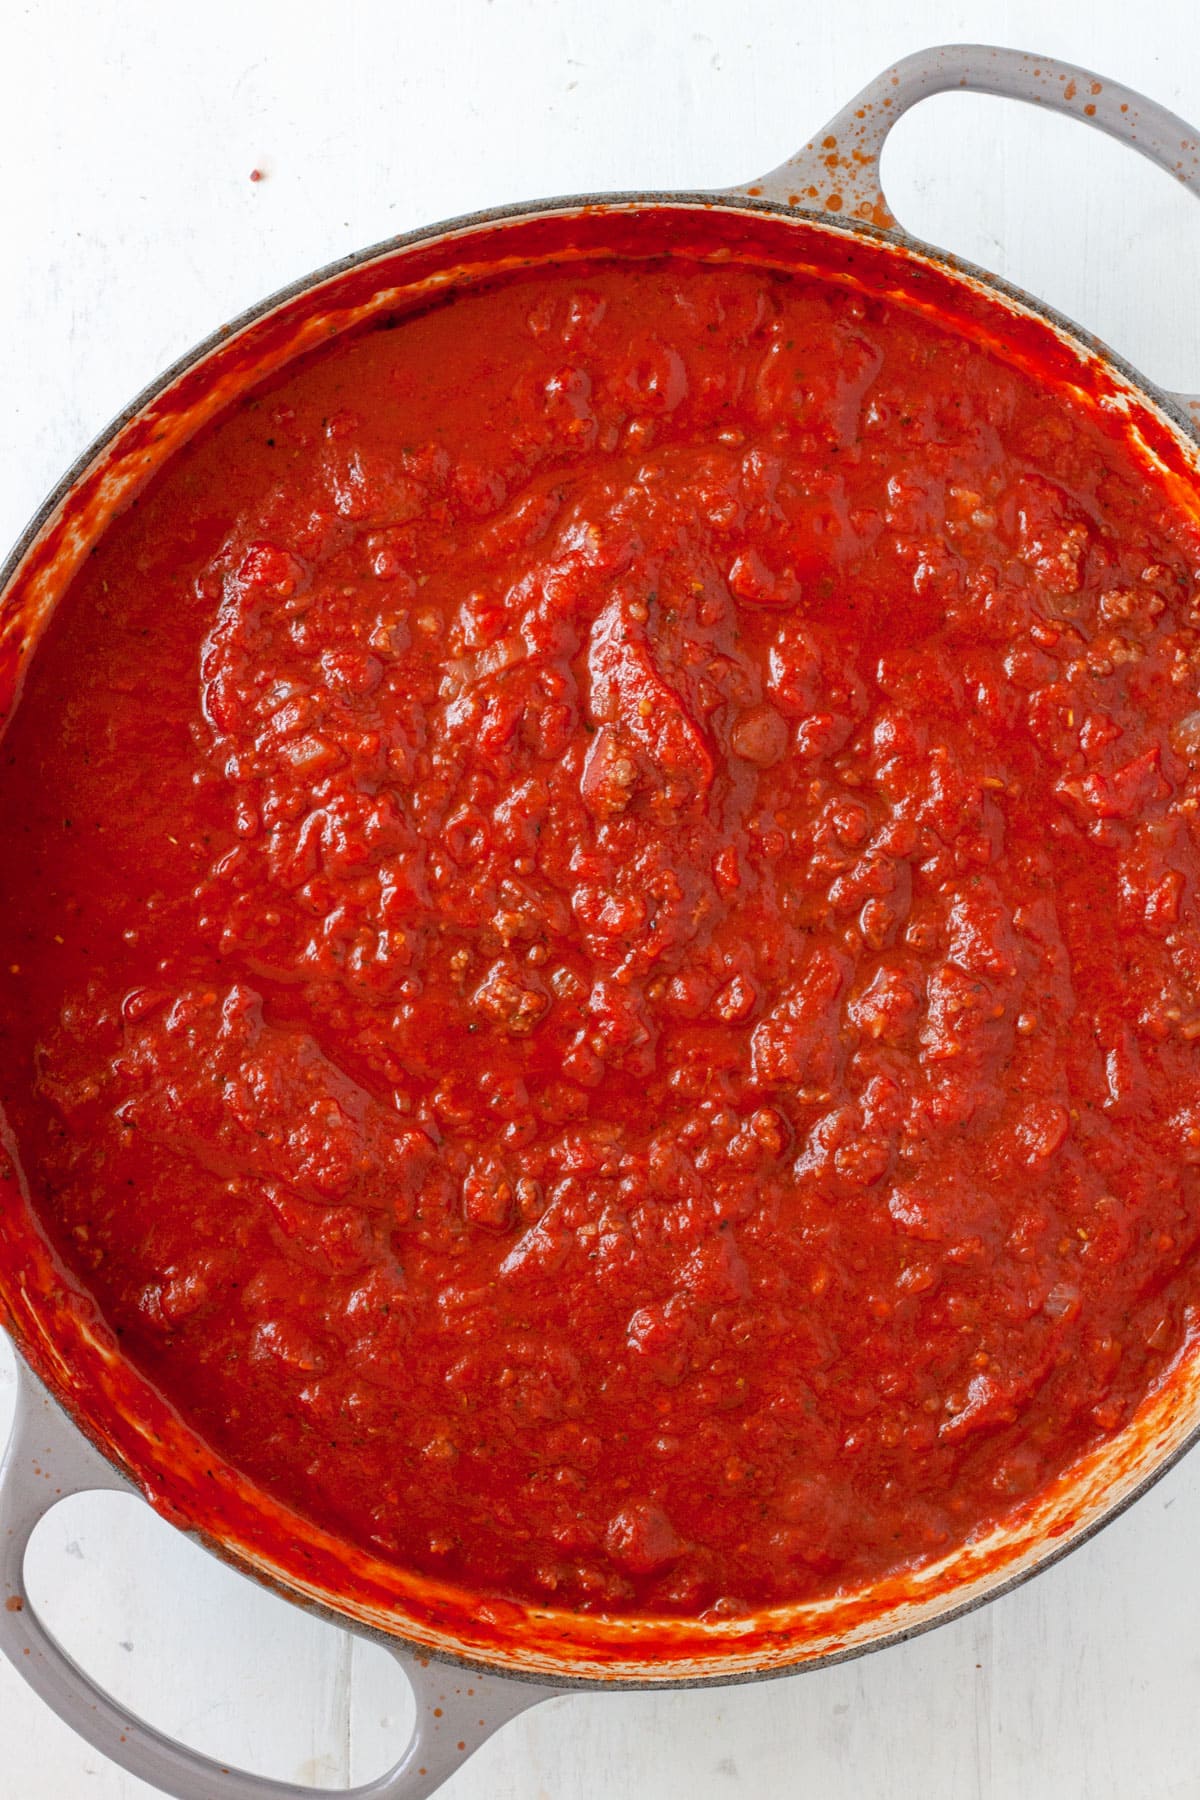 Tomato sauce cooking in a large skillet.